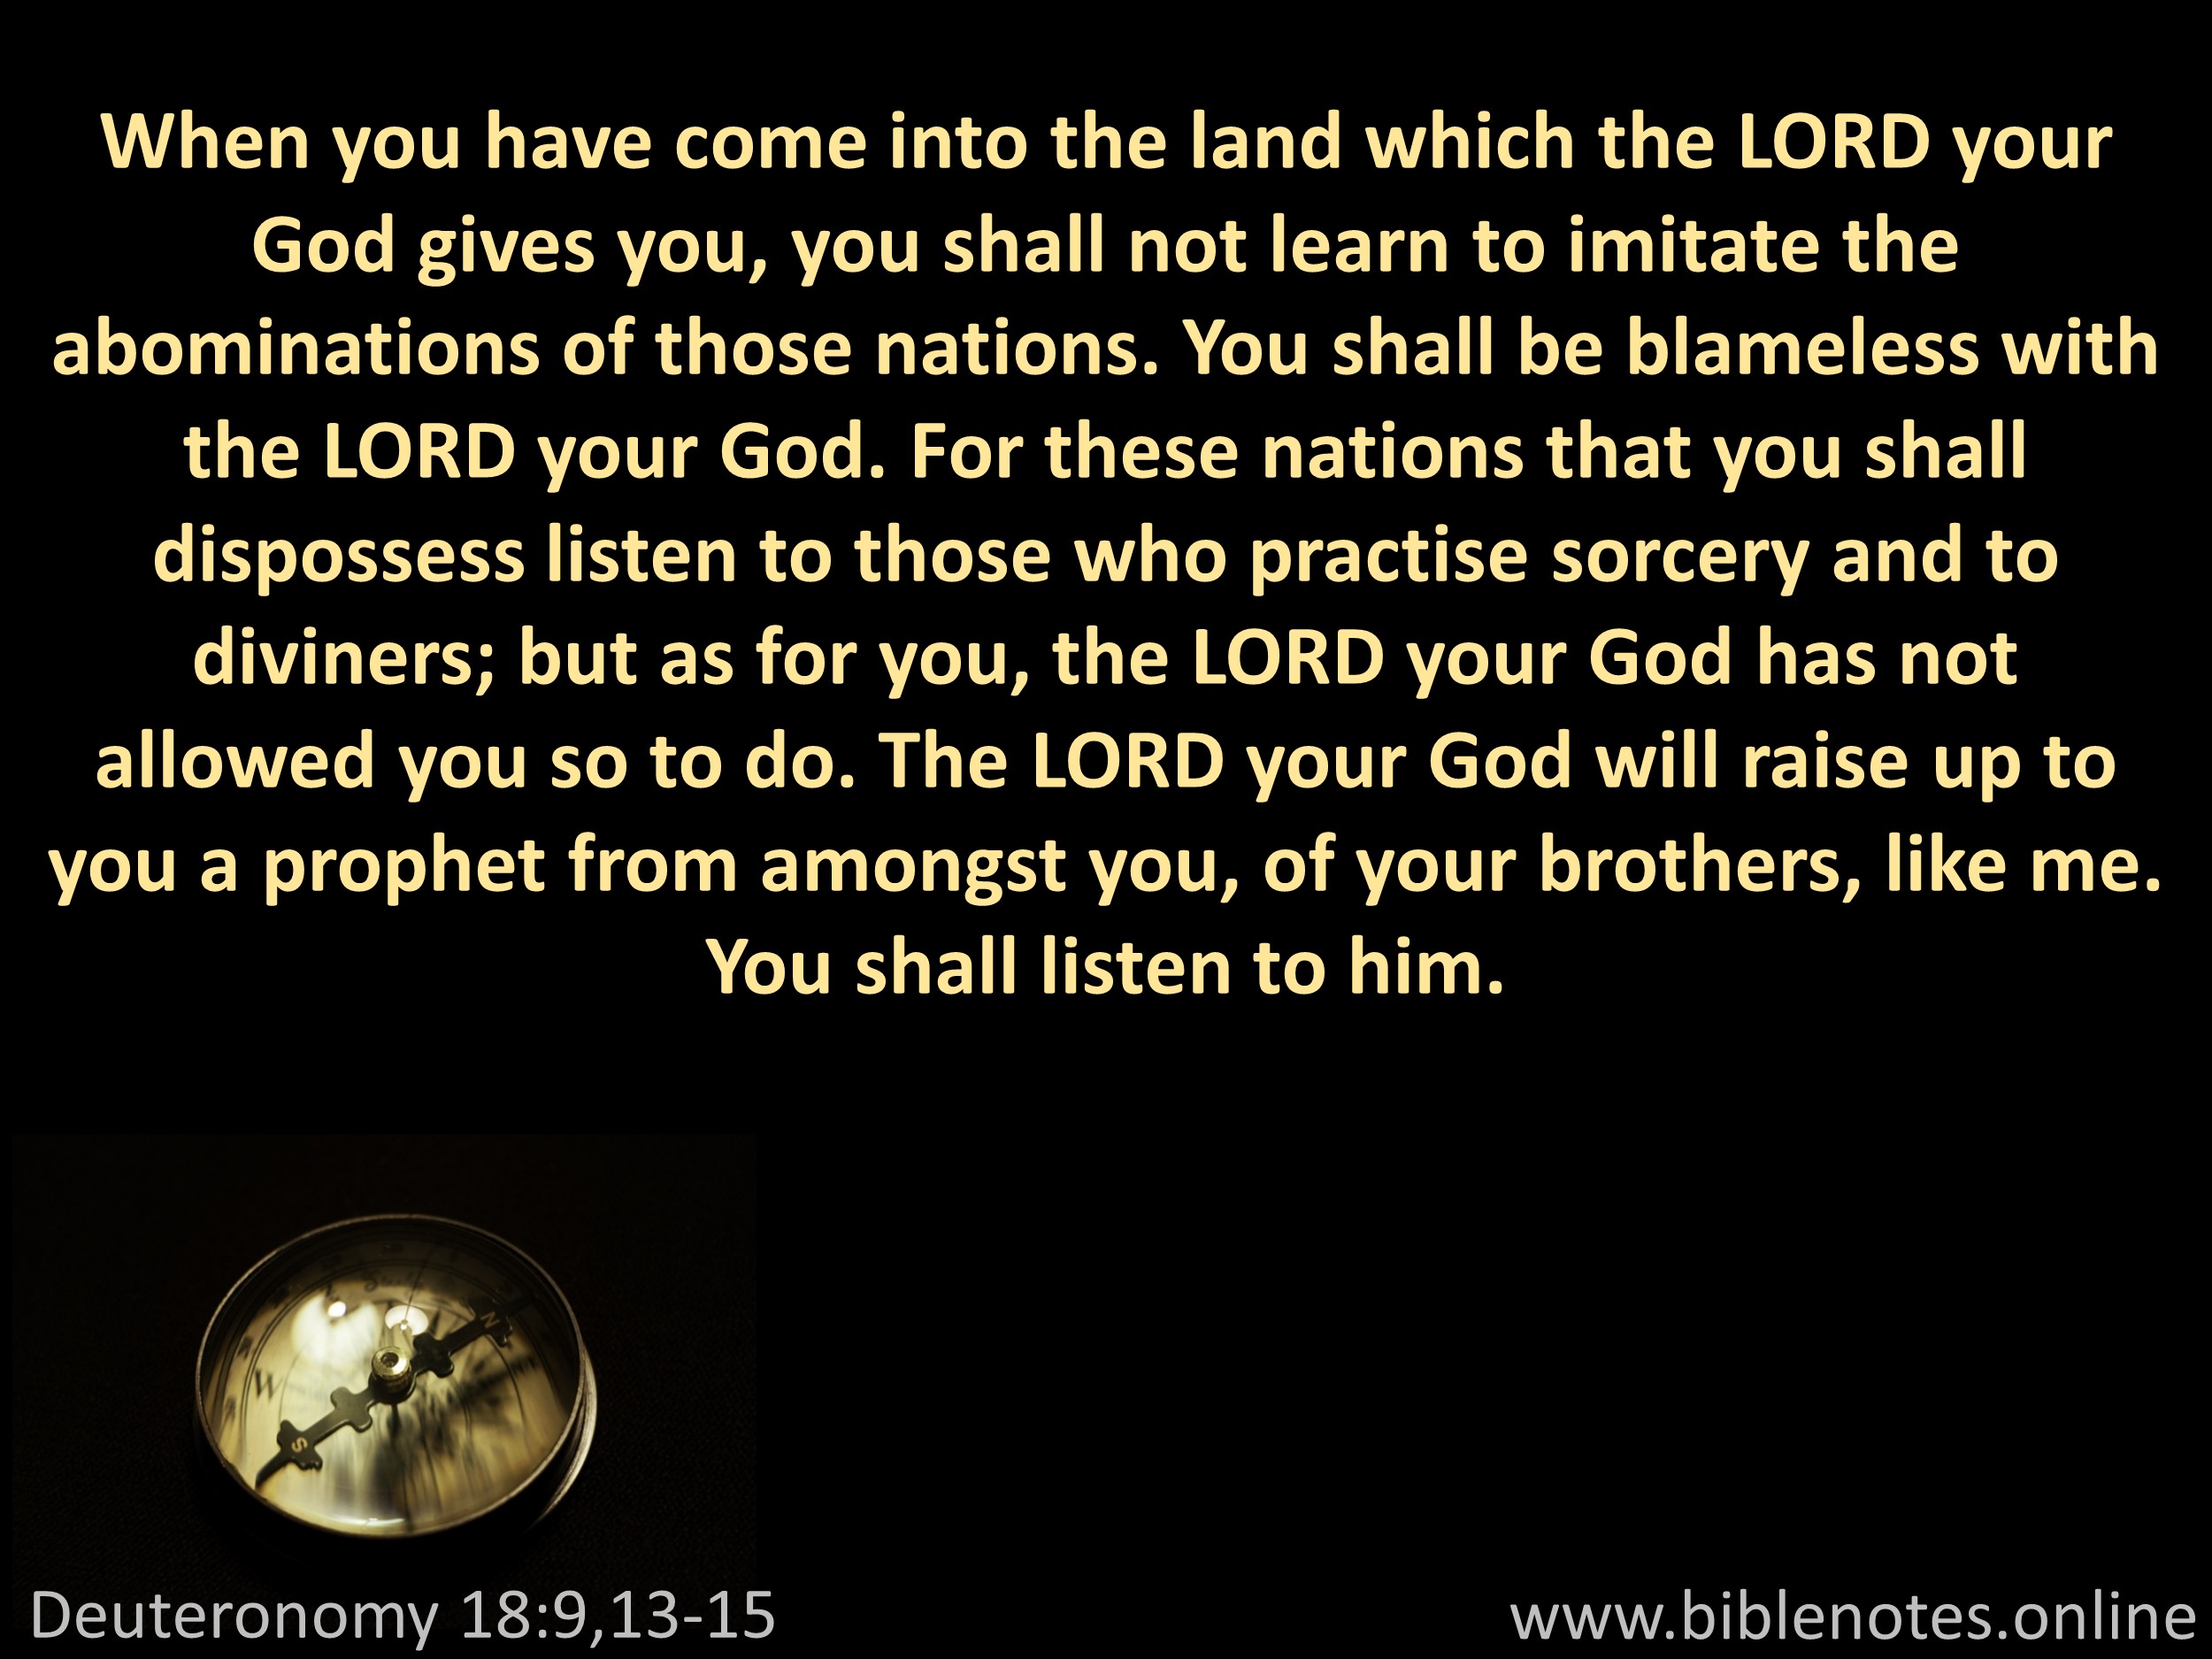 Bible Verse from Deuteronomy Chapter 18